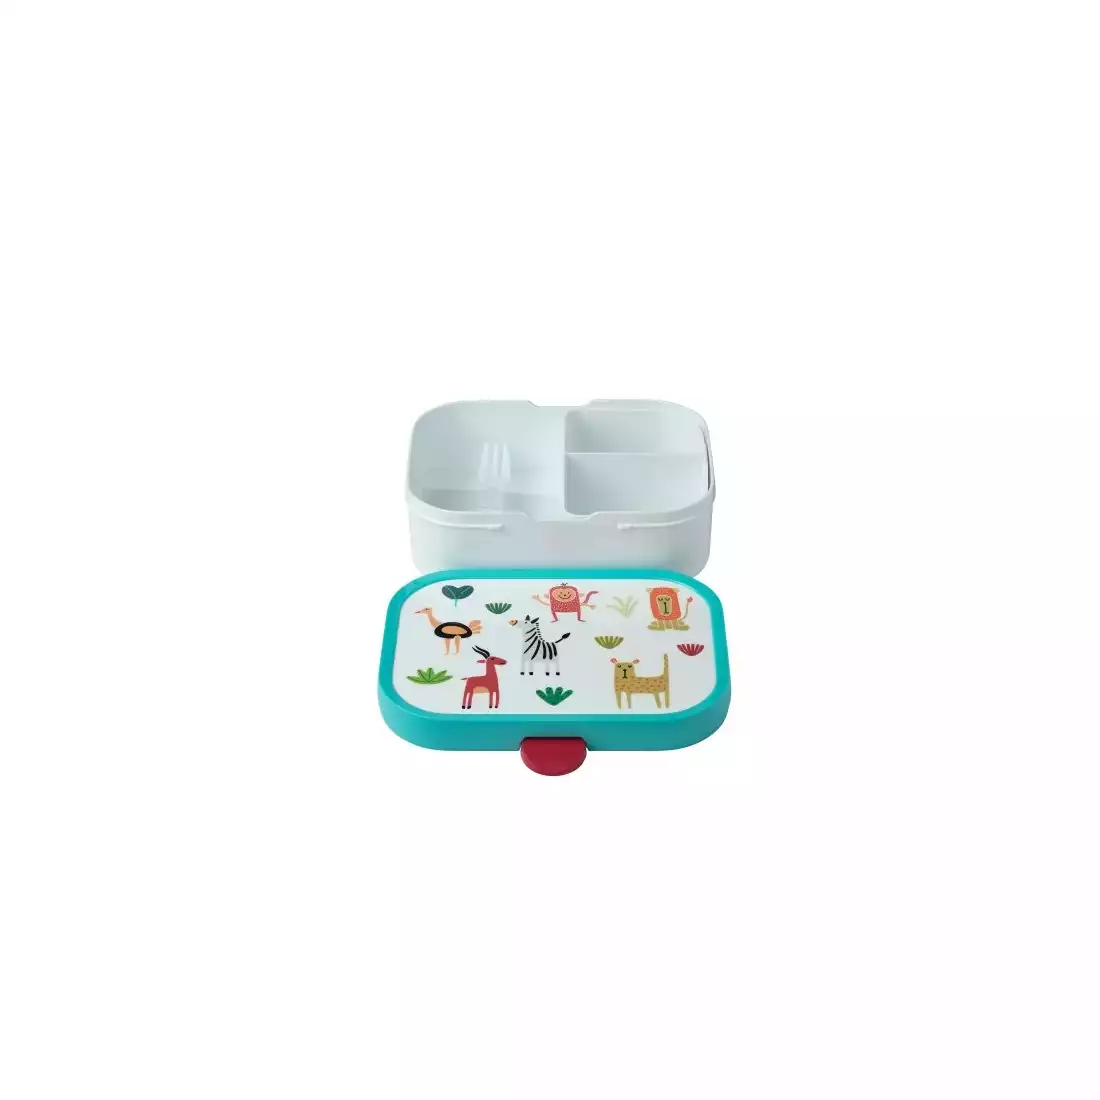 Mepal Campus Lunch set Animal Friends children's set water bottle + lunchbox, white and turquoise